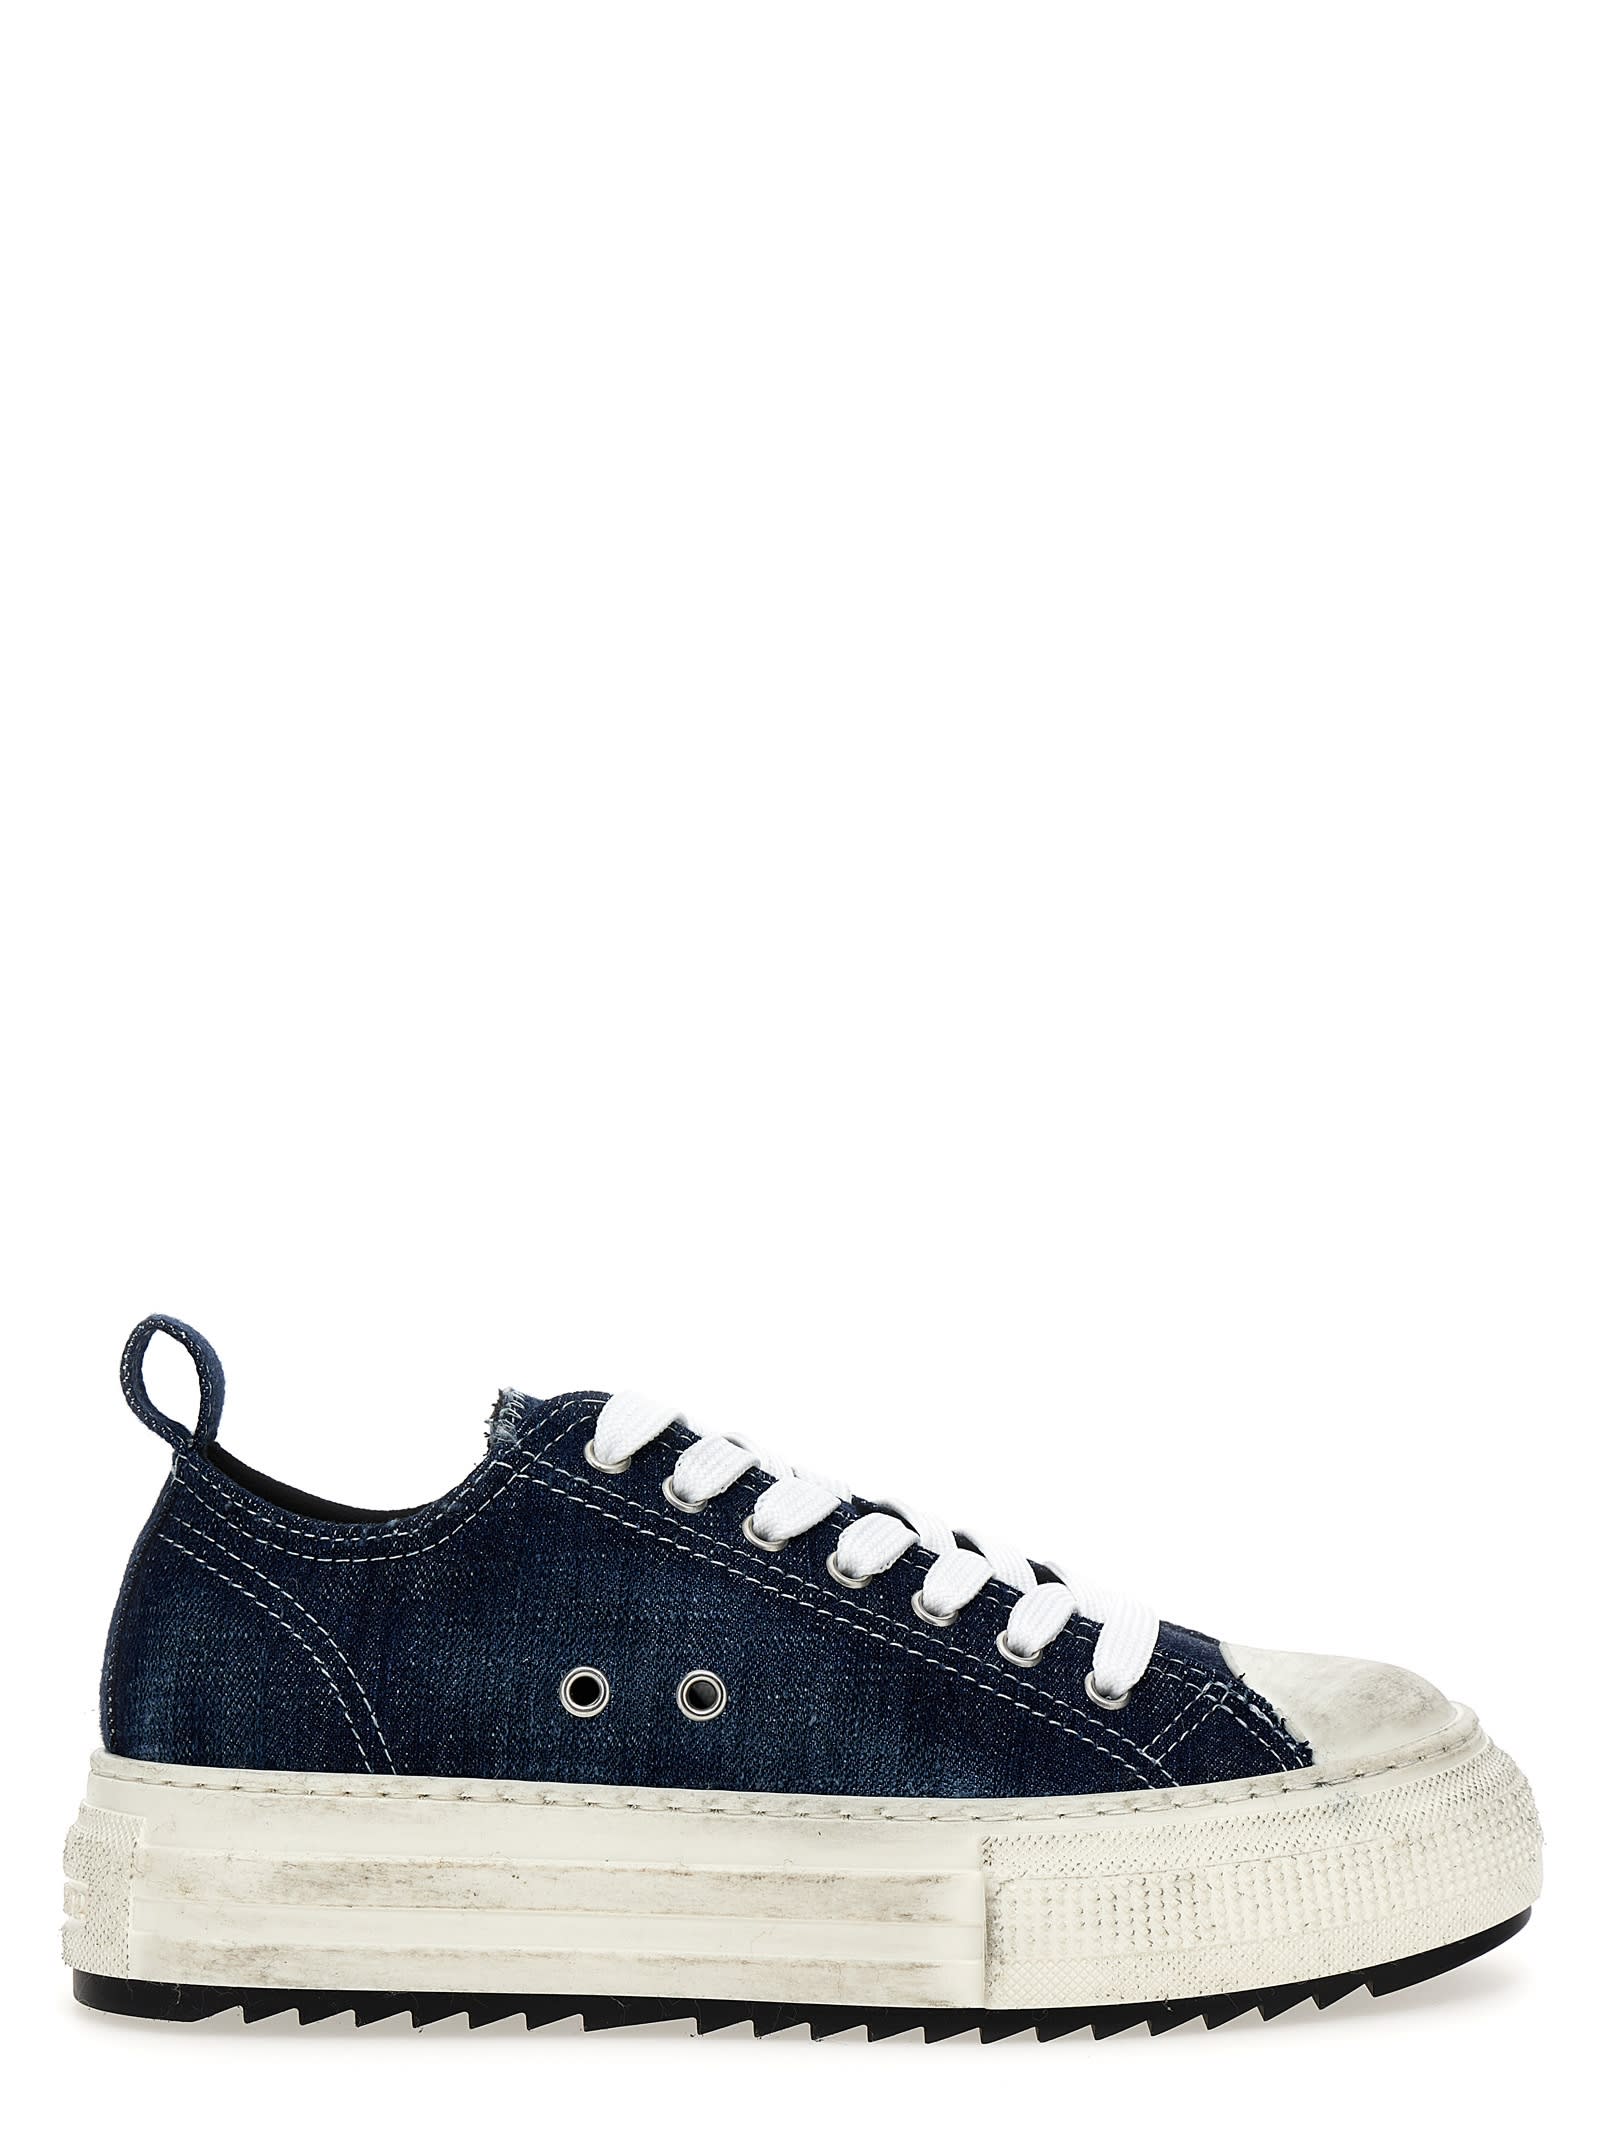 DSQUARED2 BERLIN trainers